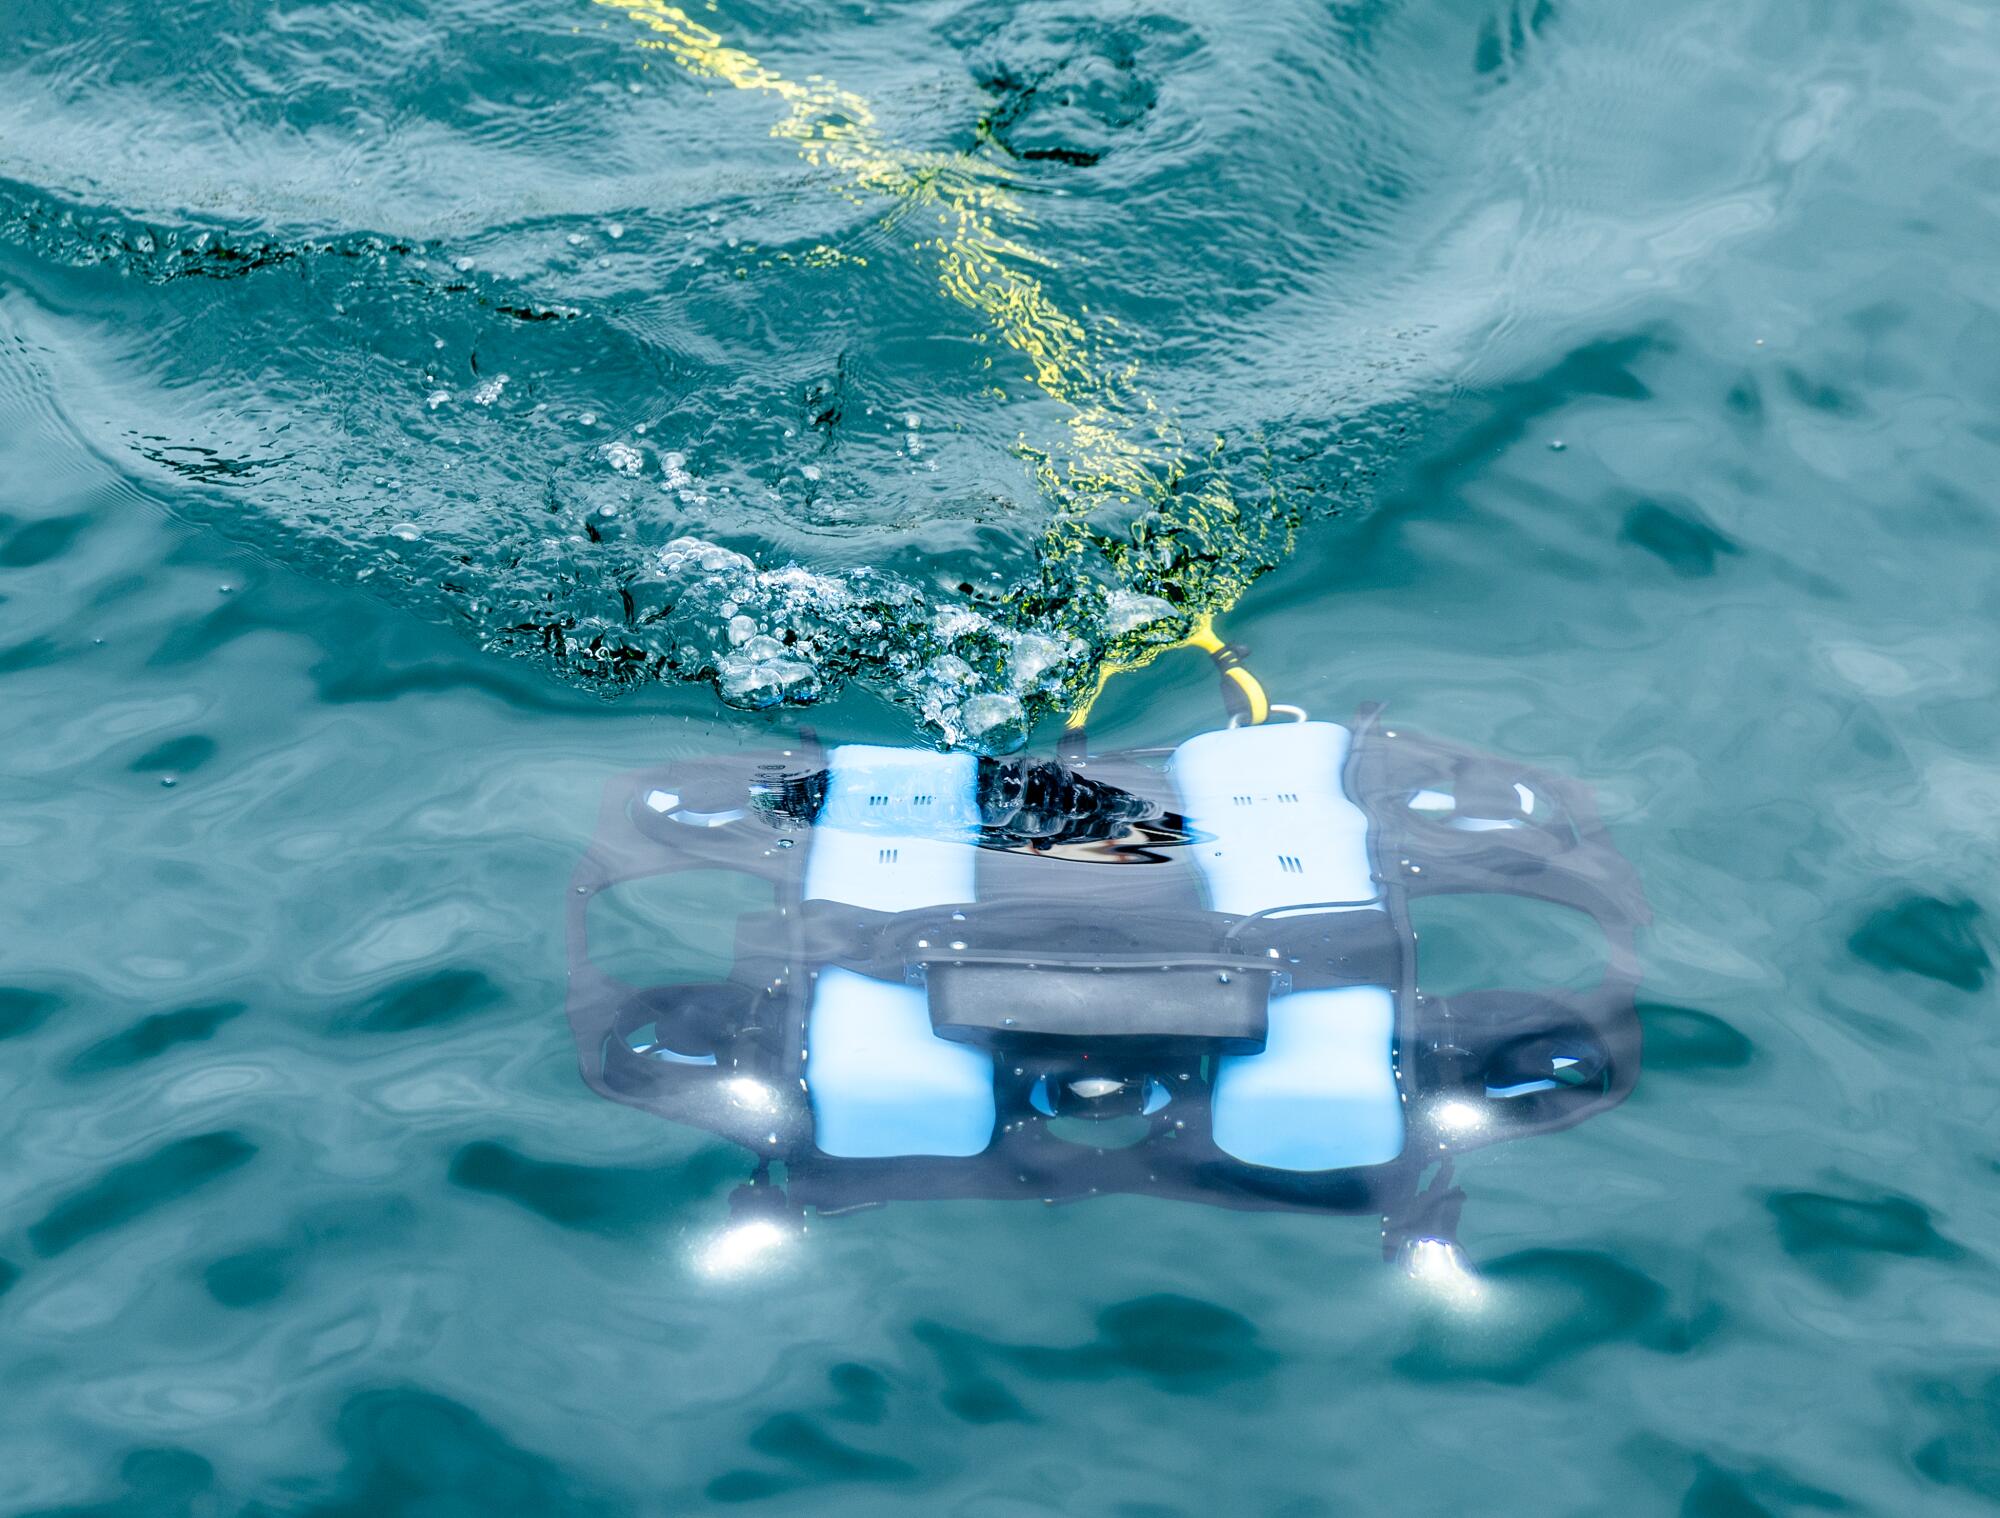 BlueROV2, a high-performance remotely operated vehicle (ROV) that can be used for inspections, investigations and adventures.